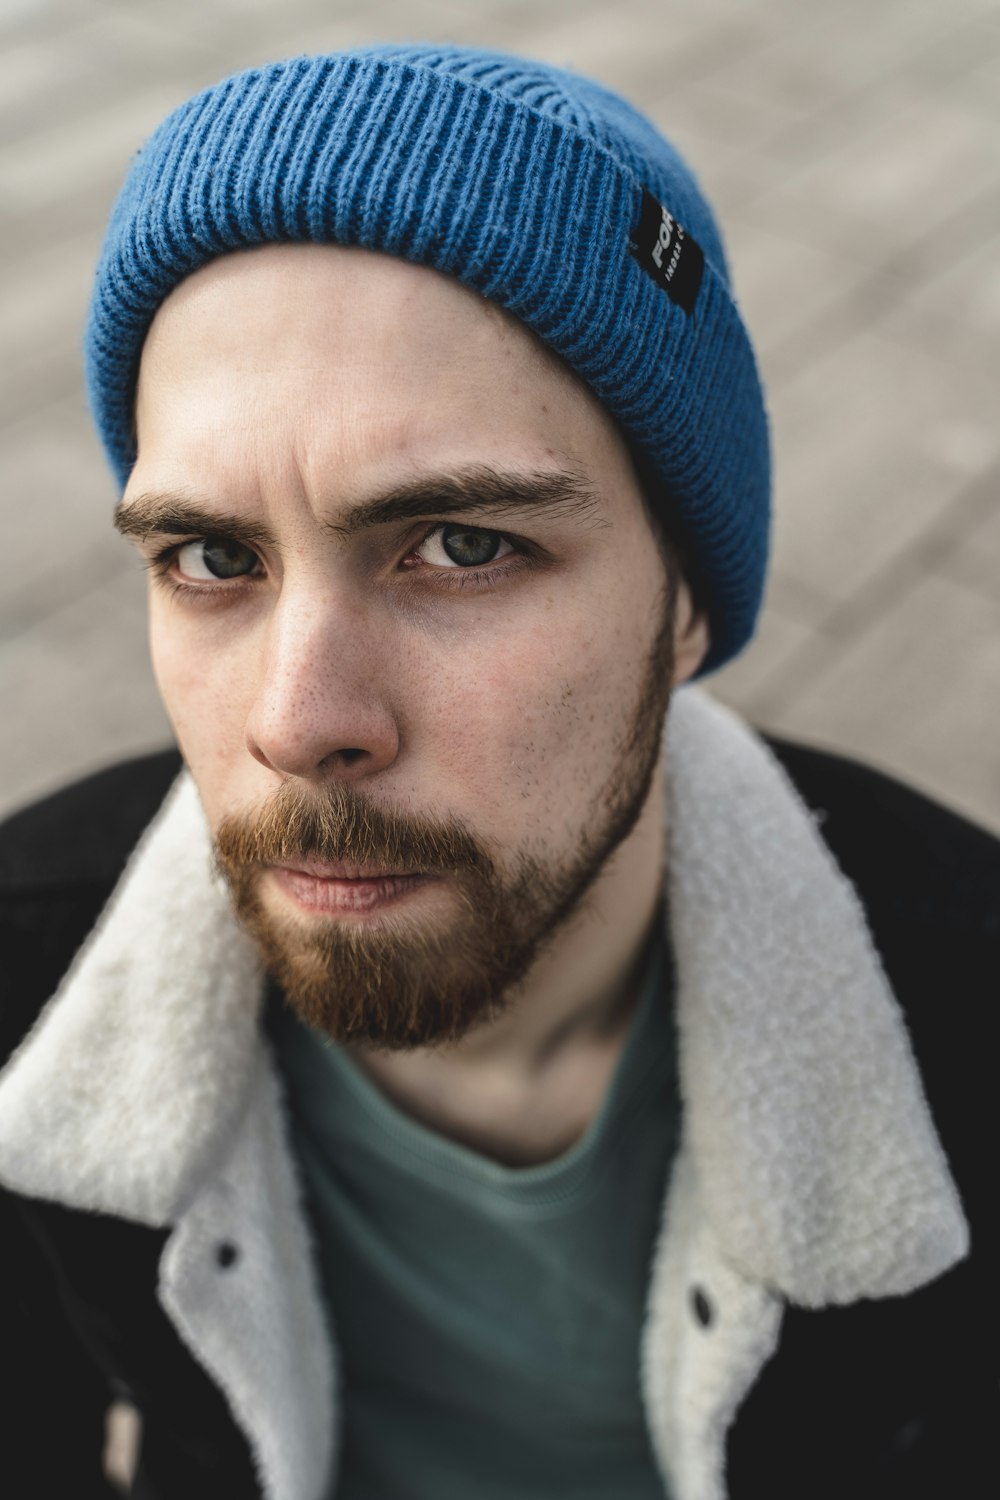 man in blue knit cap and green crew neck shirt